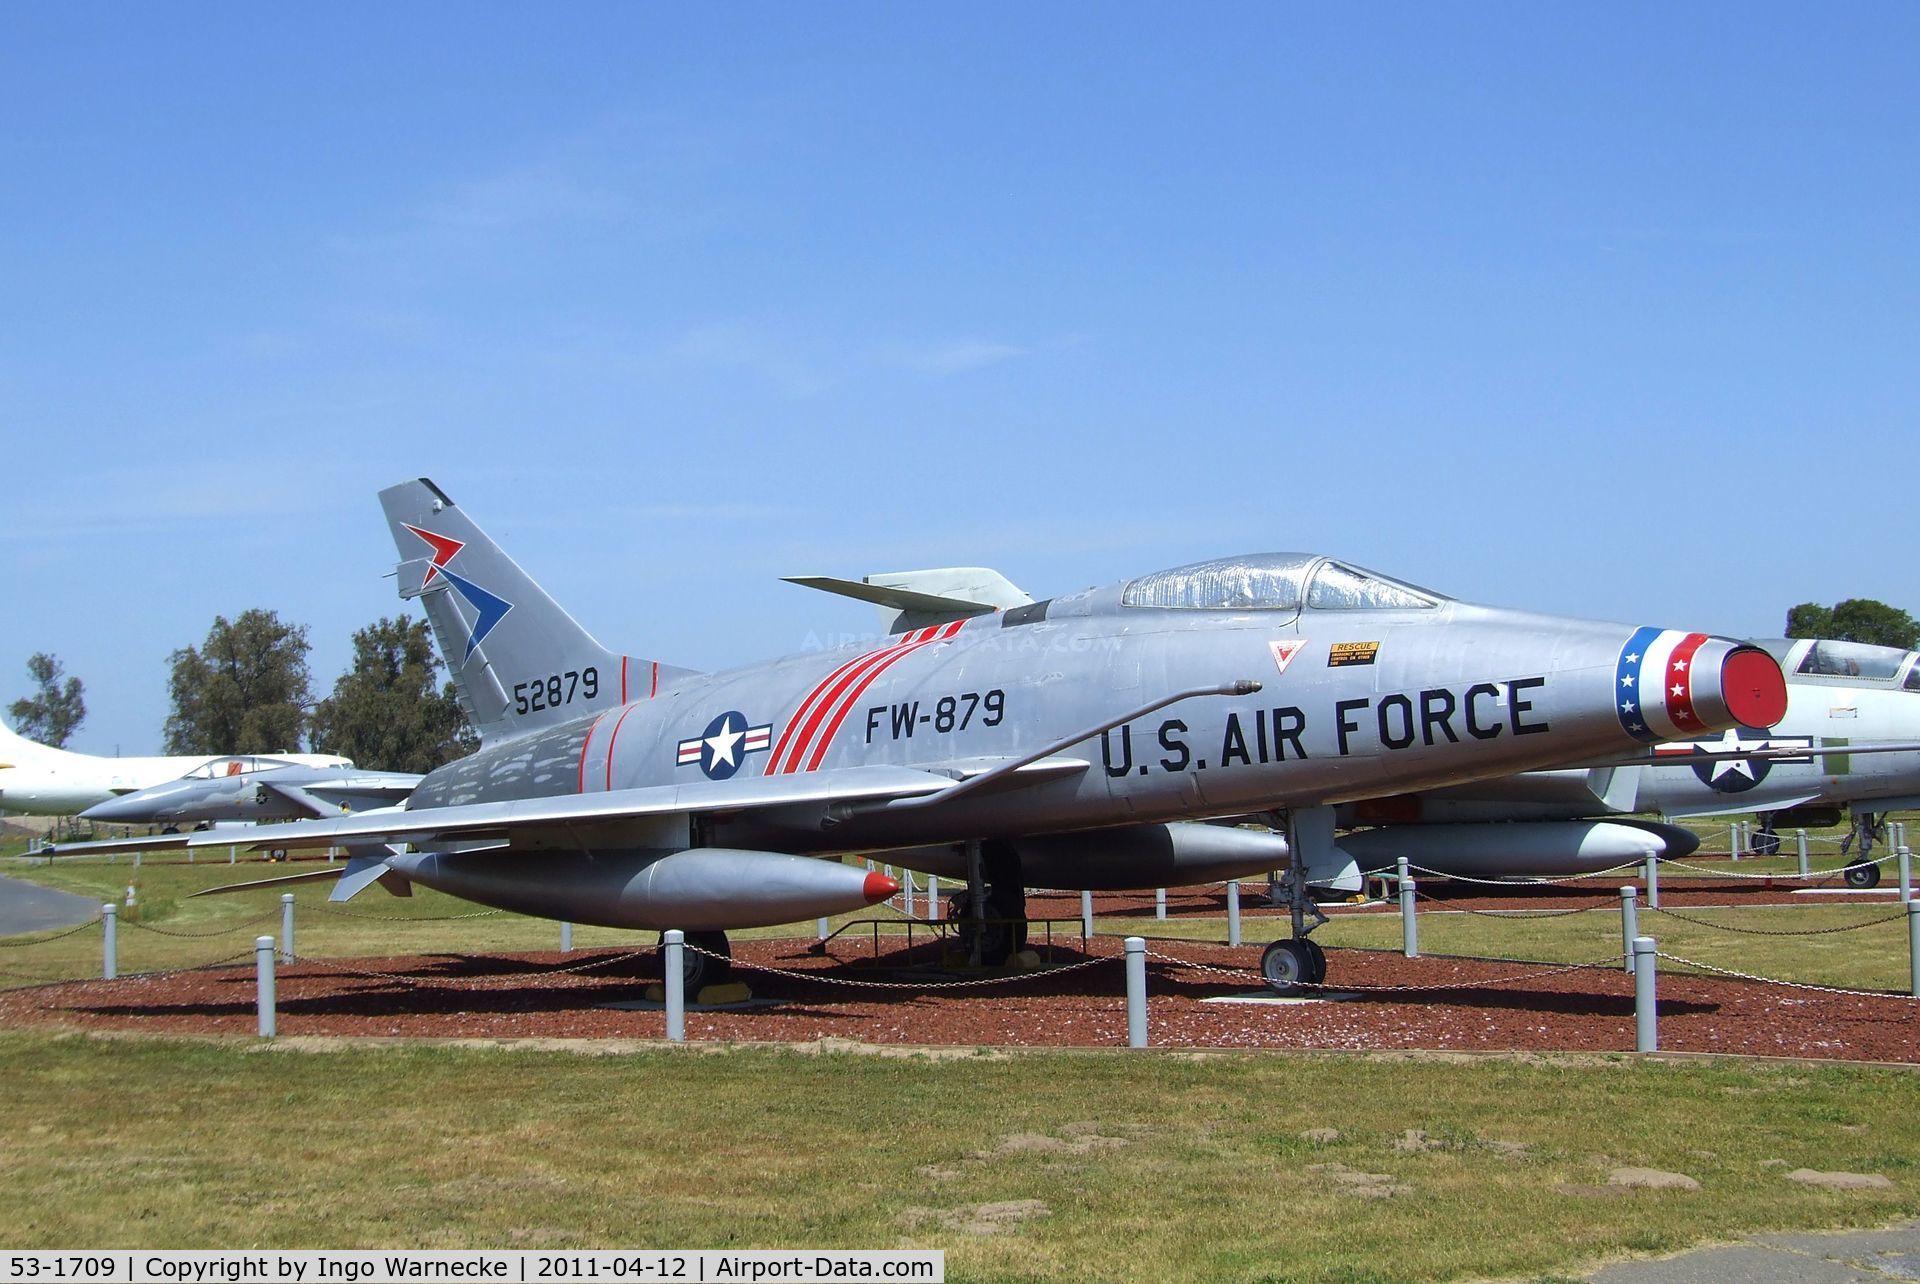 53-1709, North American F-100C C/N 214-1, North American F-100C Super Sabre (displayed as F-100D 55-2879) at the Castle Air Museum, Atwater CA